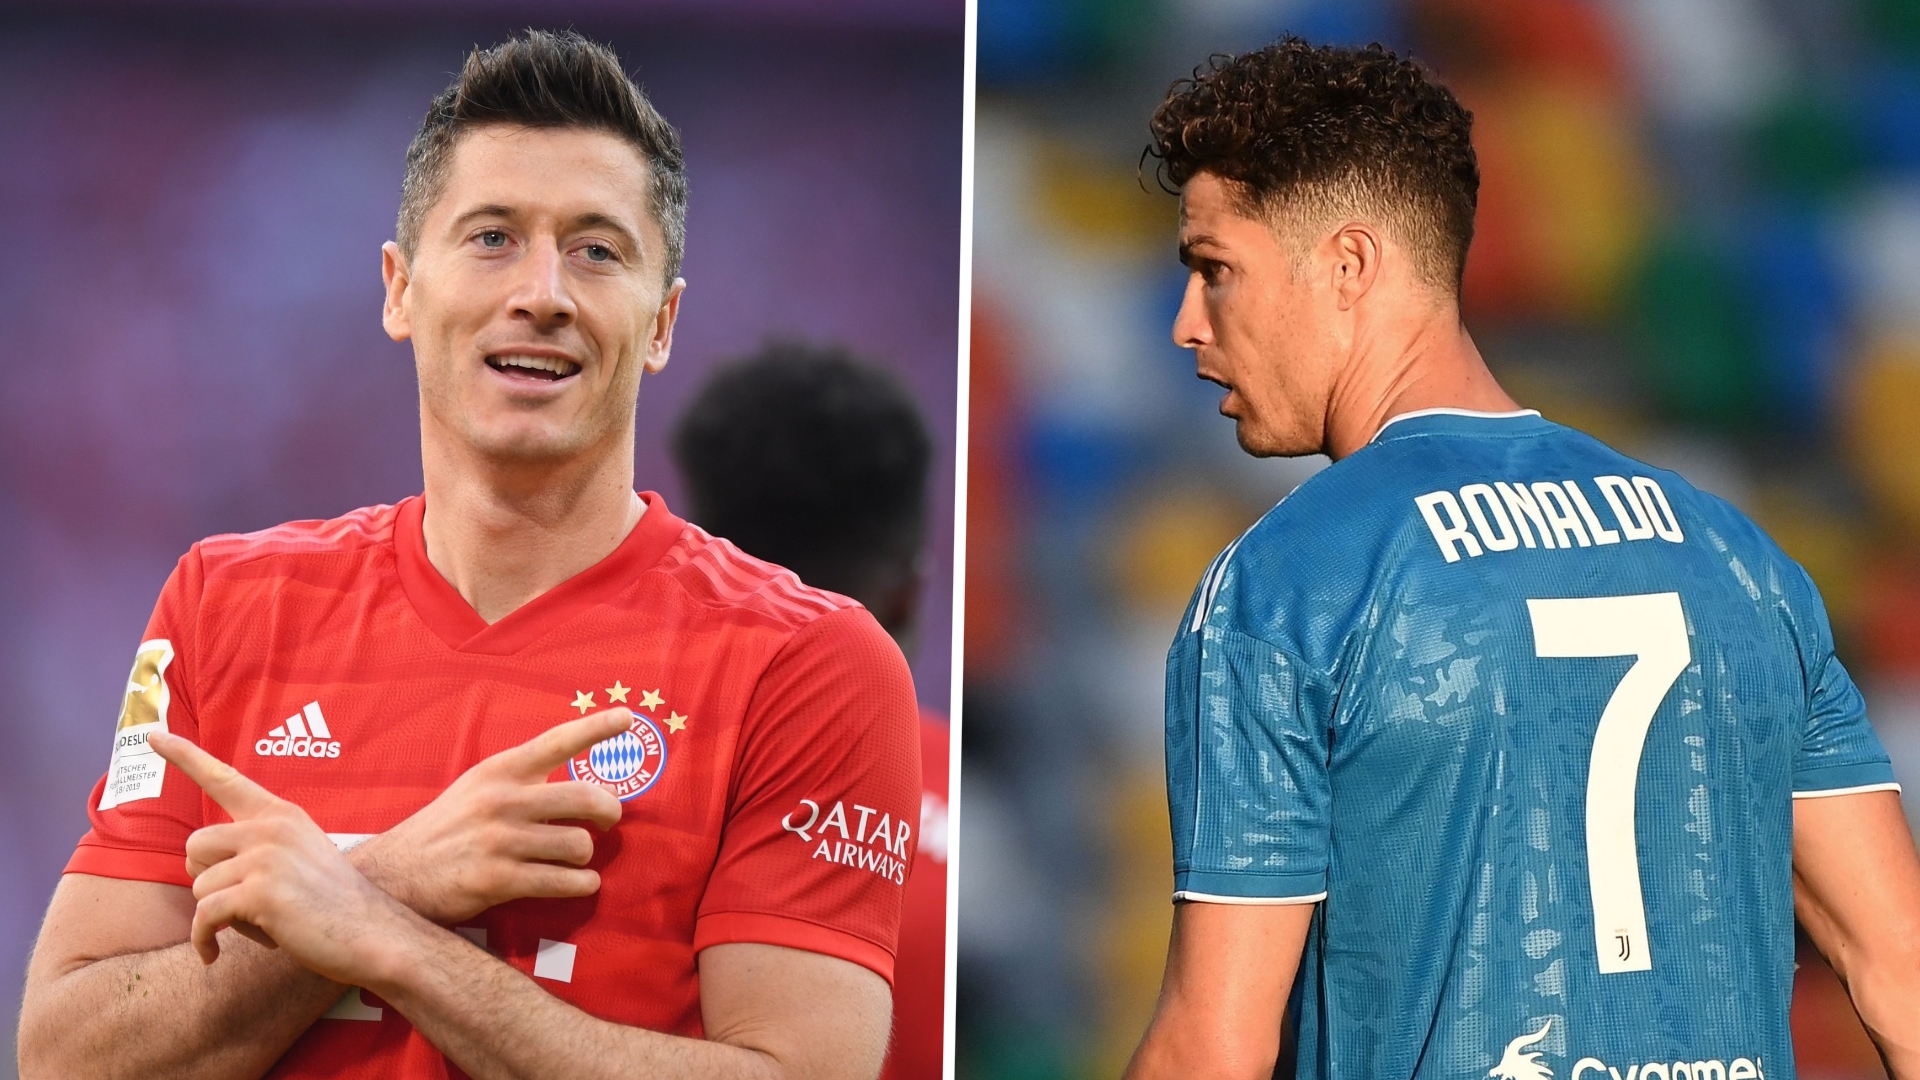 ‘Bayern don’t need Ronaldo, we have Lewandowski’ – Rummenigge says no move was made for Juventus star in 2018